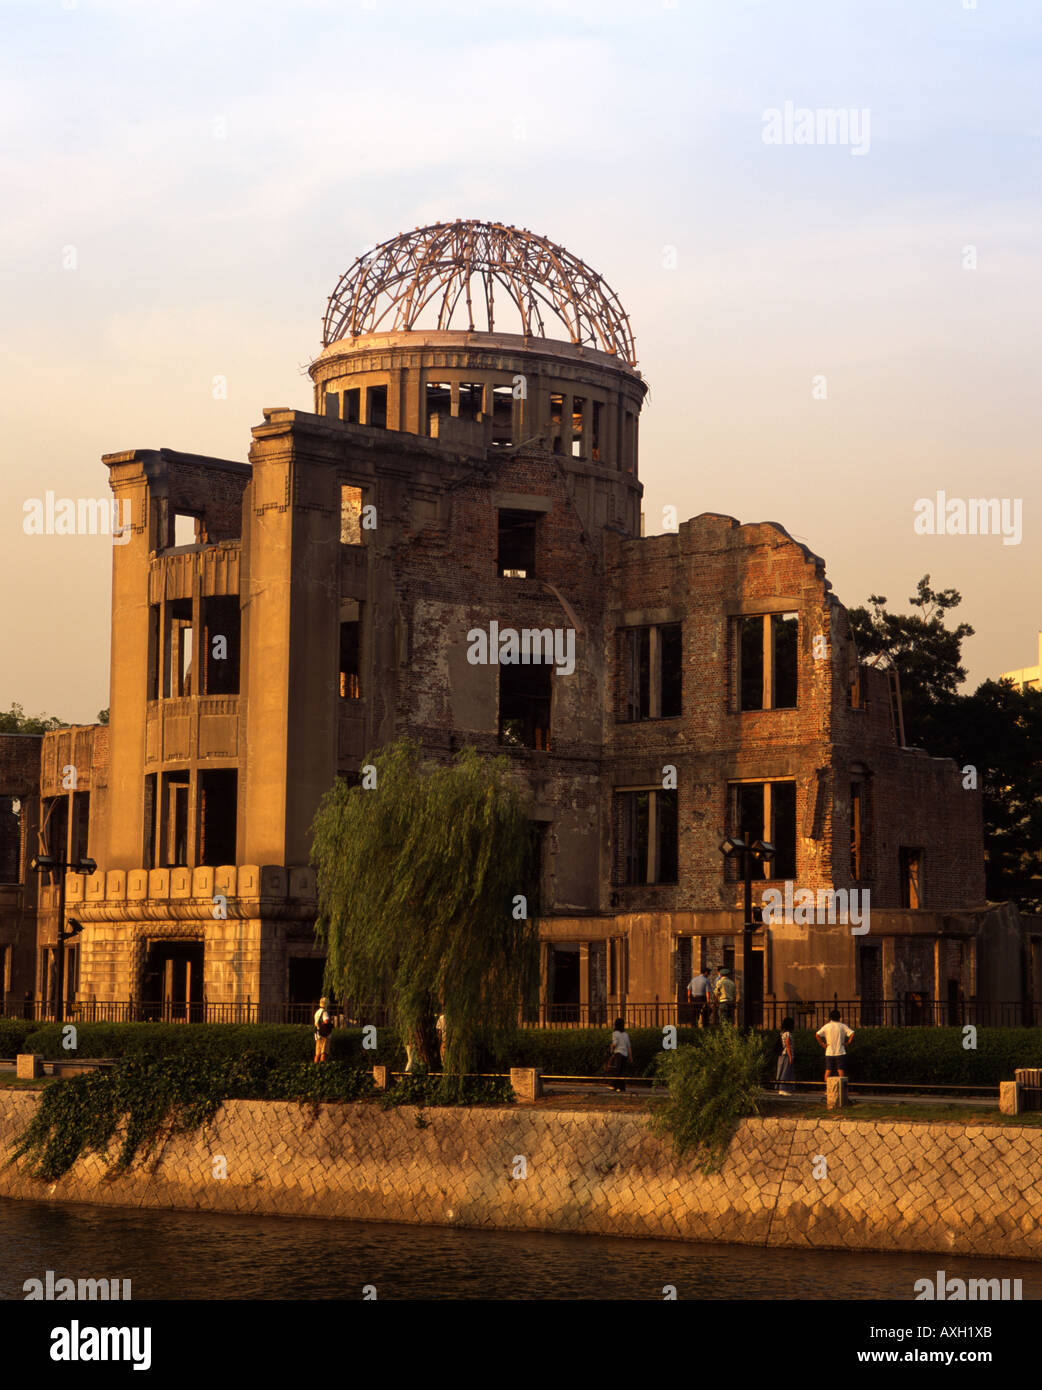 Dating Hiroshima sites totally 100 free in science.newsriver.org